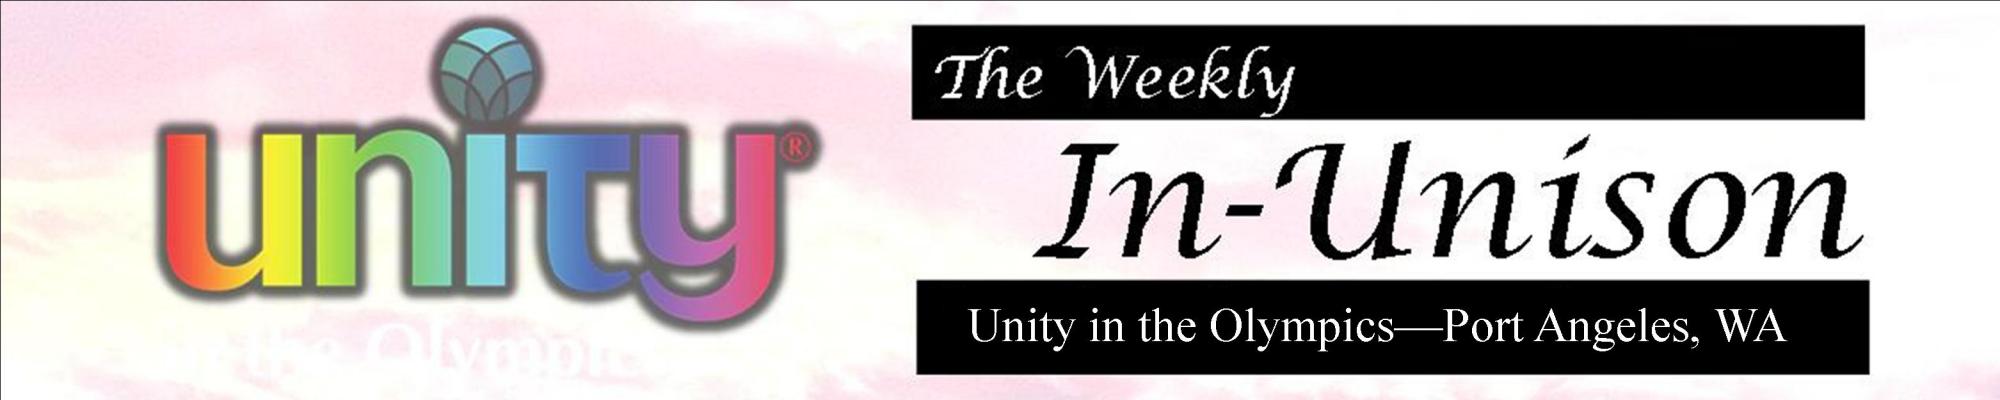 The Weekly IN-UNISON February 7, 2024 Edition